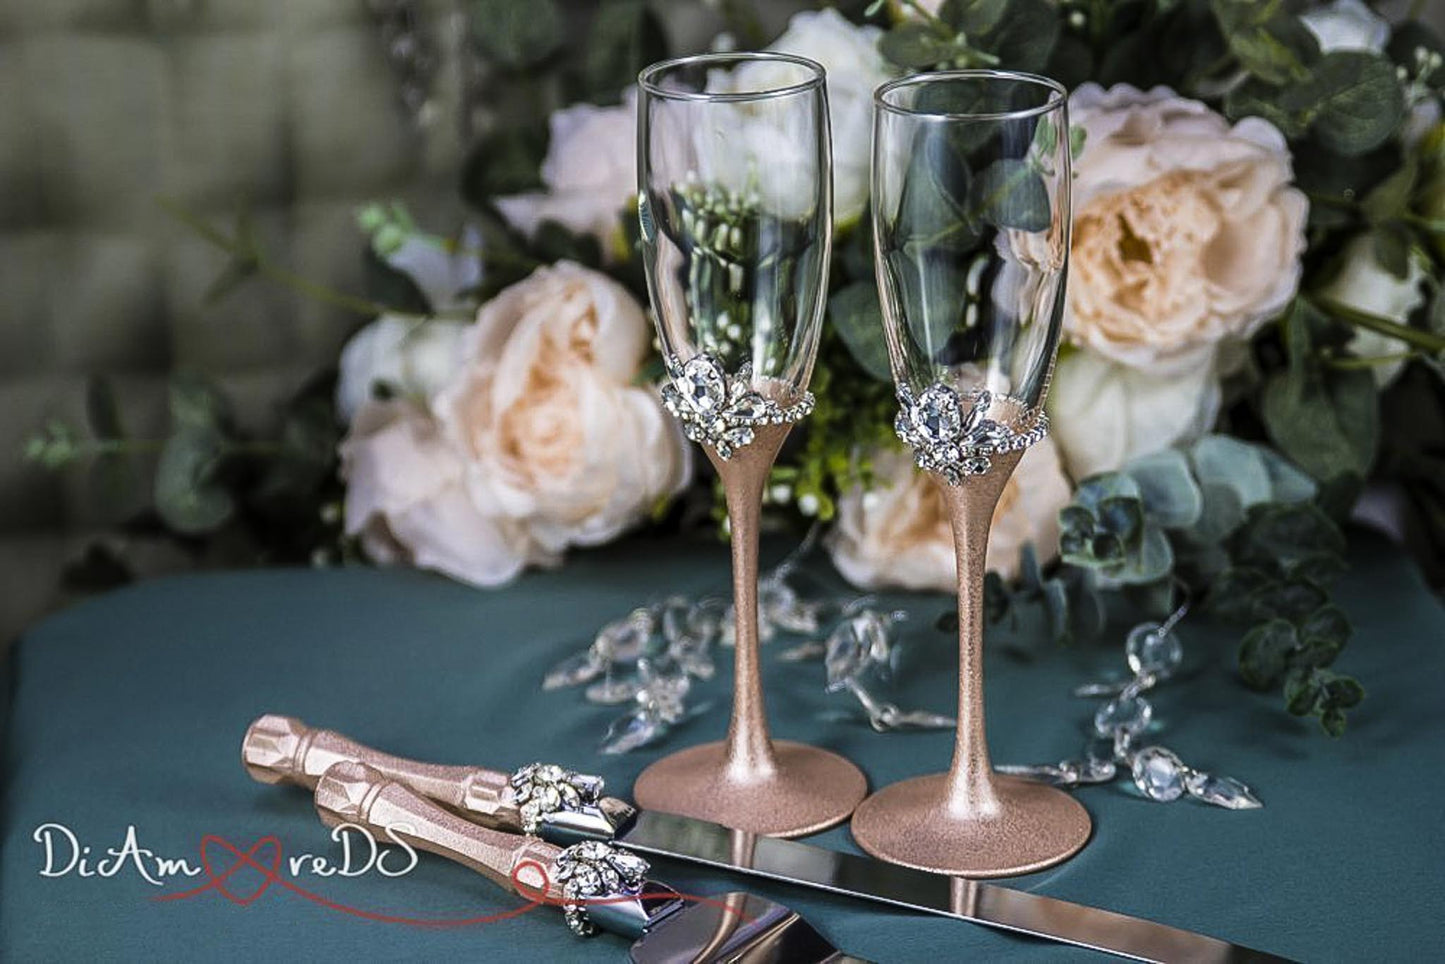 Personalized wedding champagne flutes and cake set